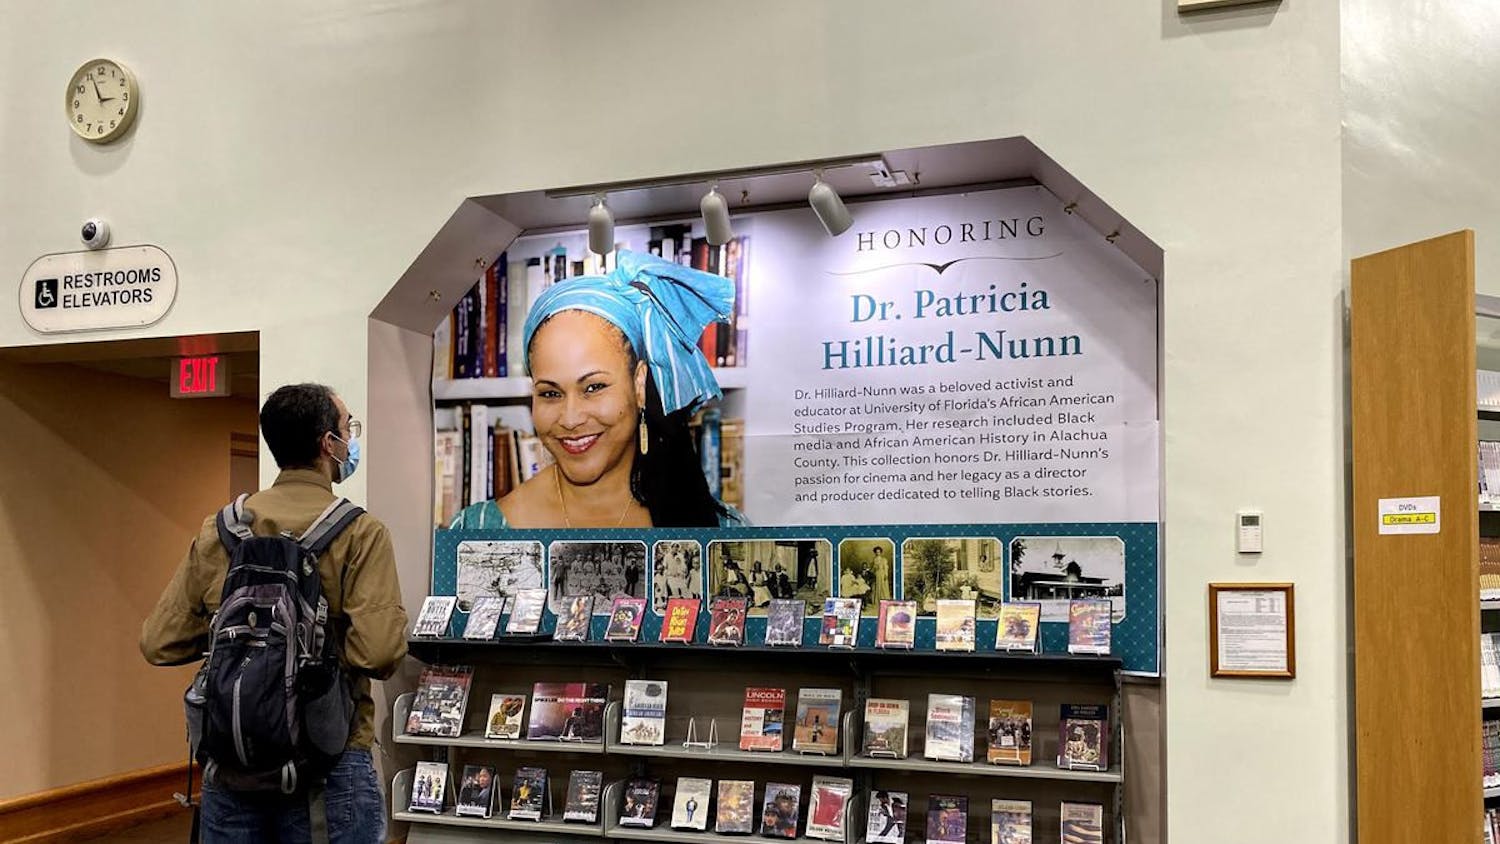 A man observes the collection of movies and books on the display honoring the late Patricia Hilliard-Nunn at the Headquarters Library. Hilliard-Nunn was an activist and adjunct associate professor at UF in the African American Studies Program who died on Aug. 5 at 57.